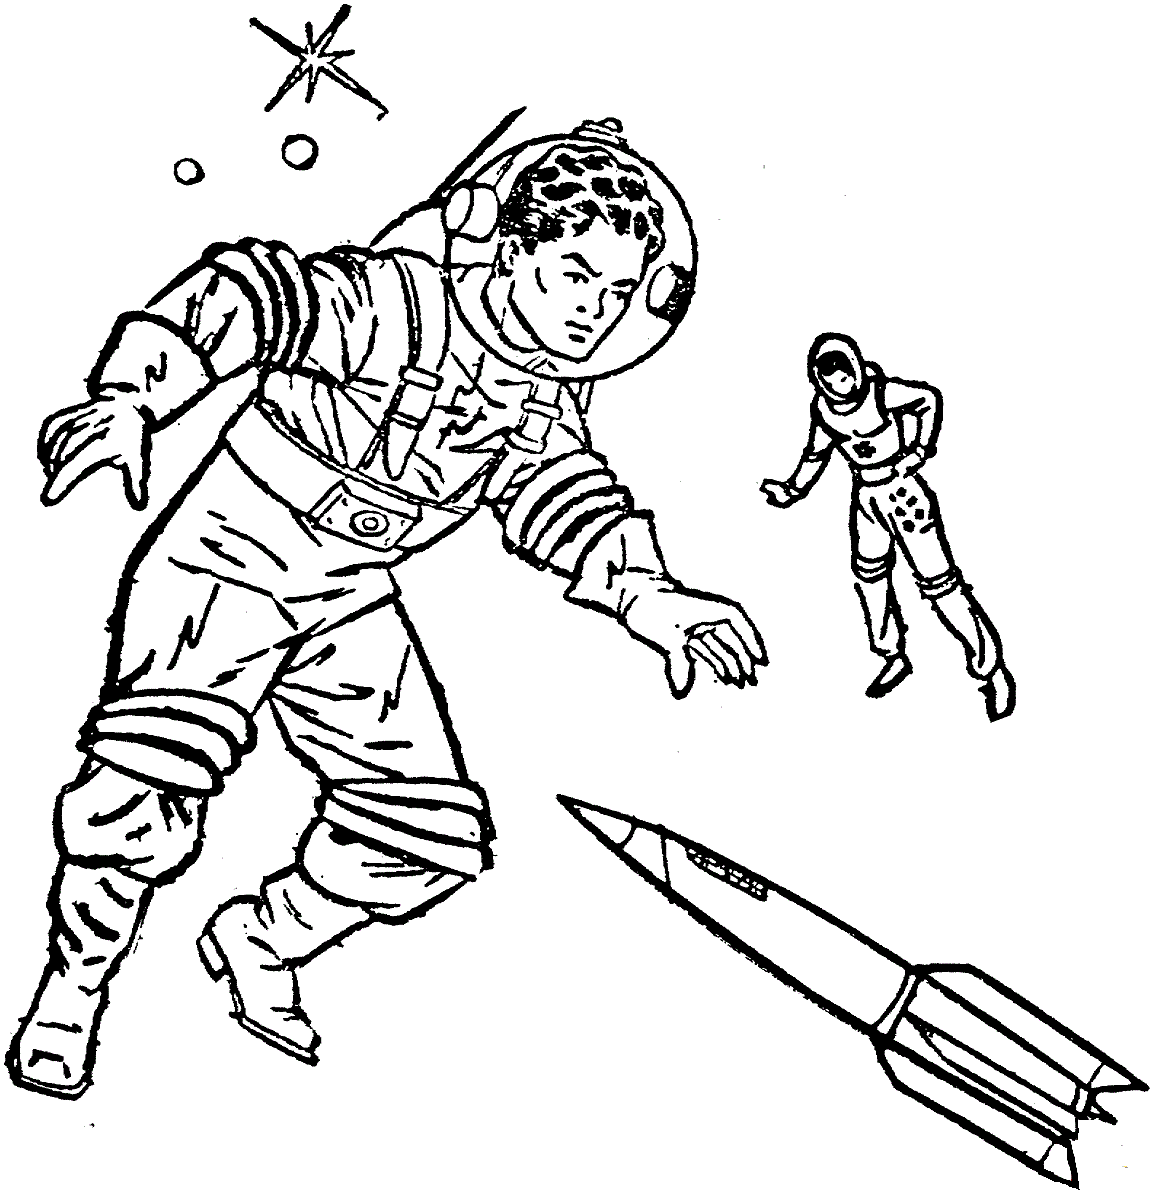 Astronauts in space coloring page